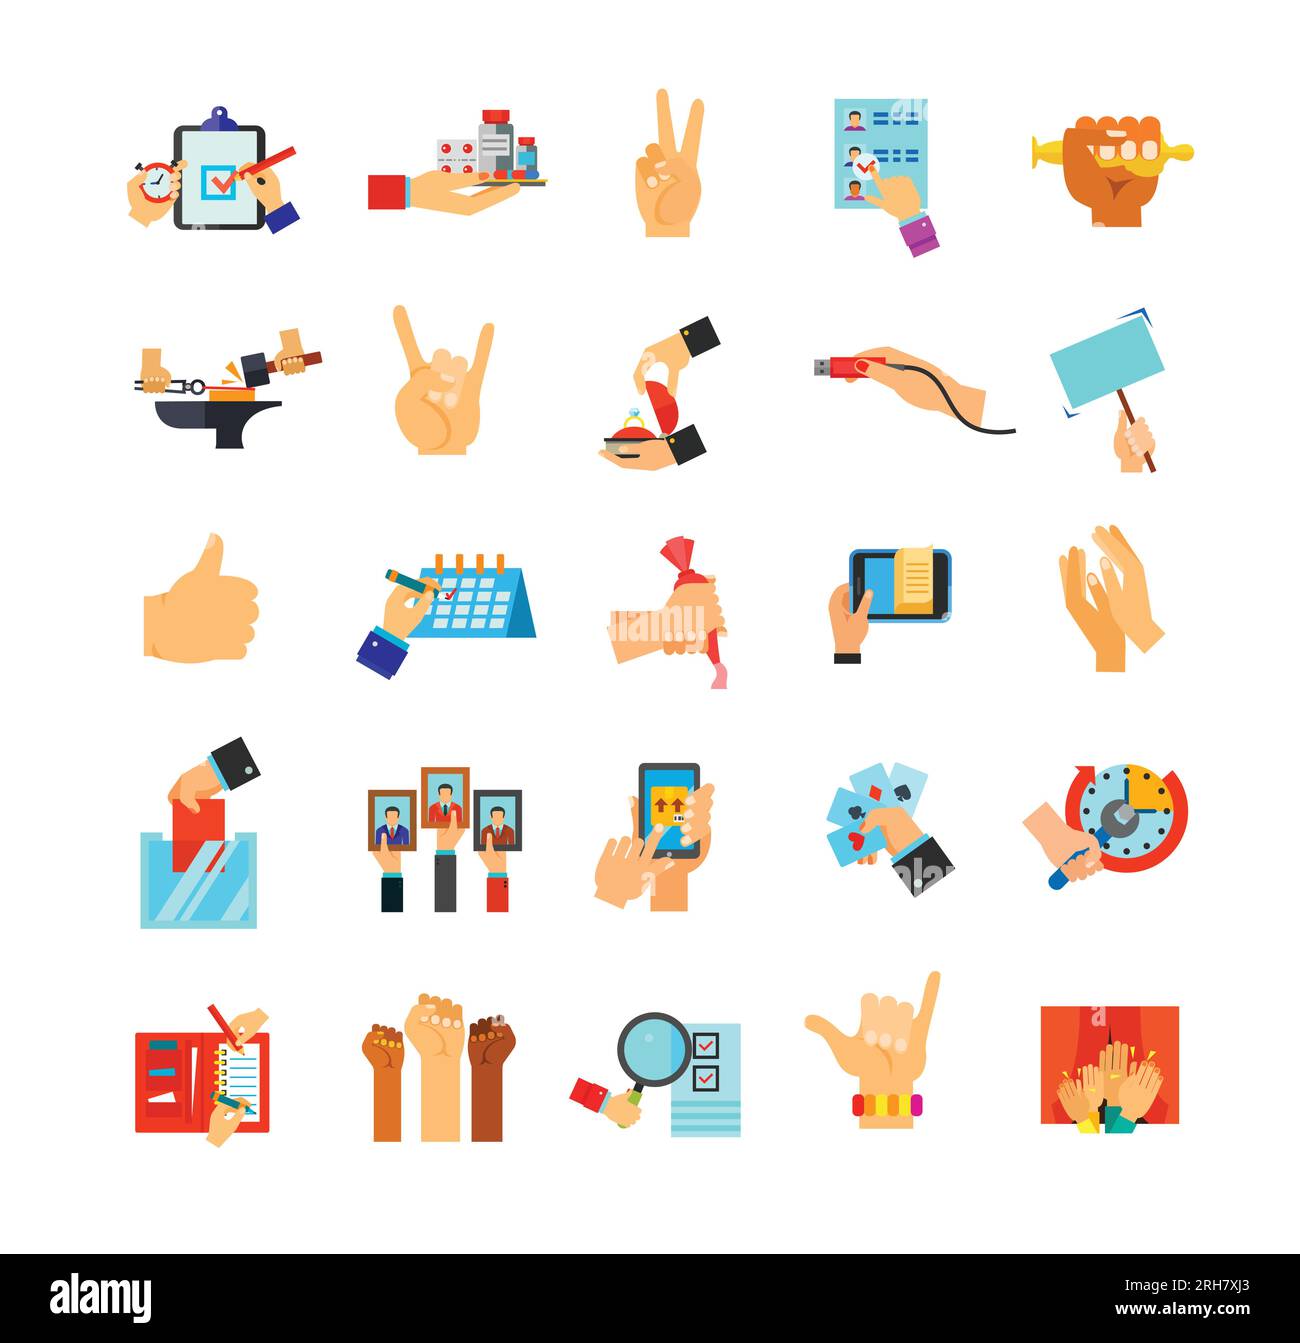 Hands holding different objects icon set Stock Vector